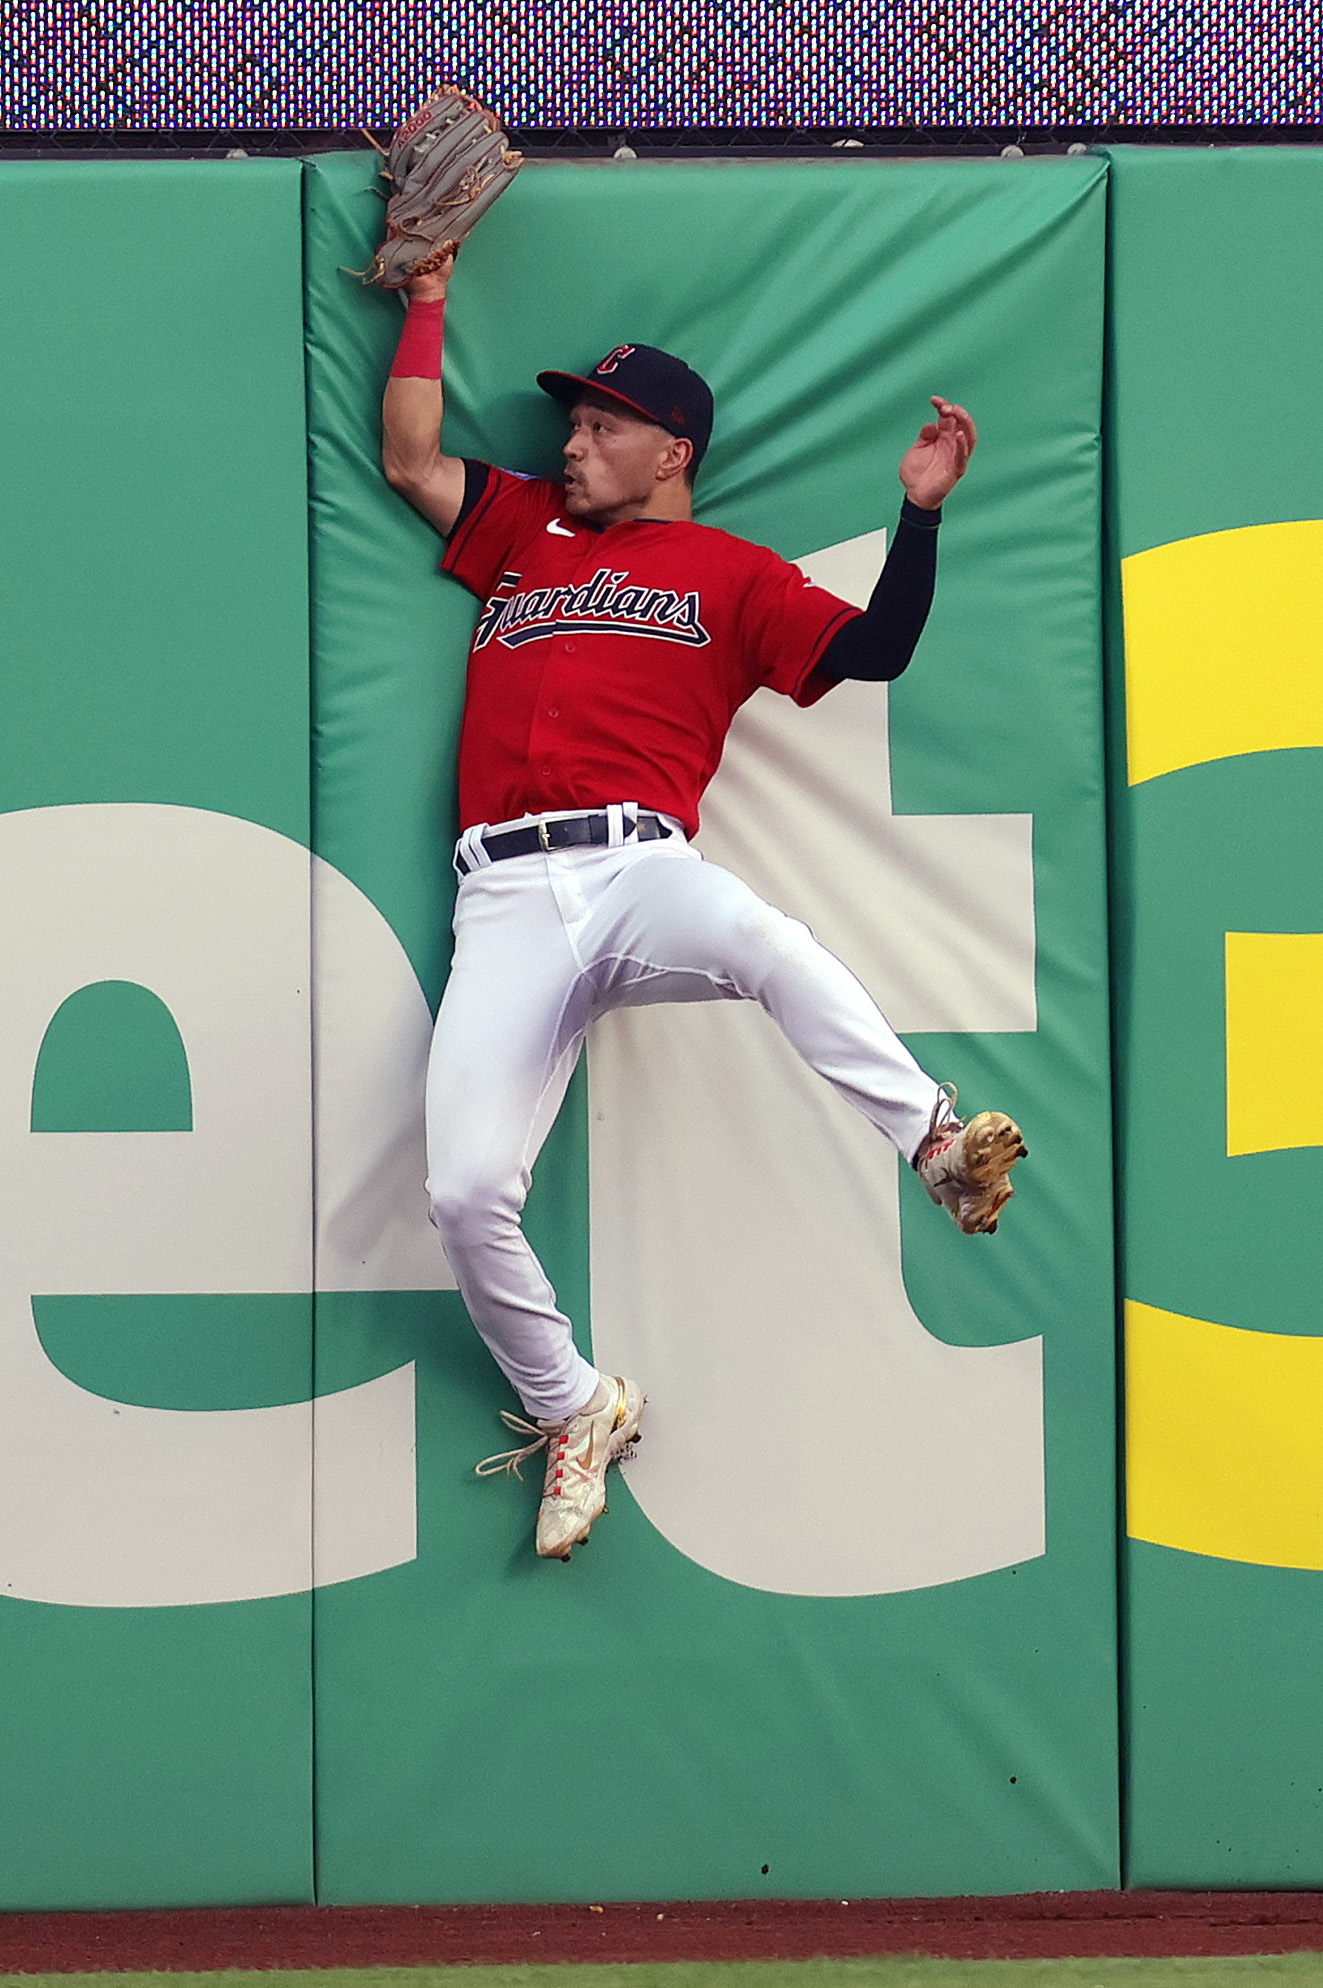 Cleveland Guardians left fielder Steven Kwan leaps up towards the outfield wall to catch a long fly ball for the out off the bat of Tampa Bay Rays third baseman Taylor Walls